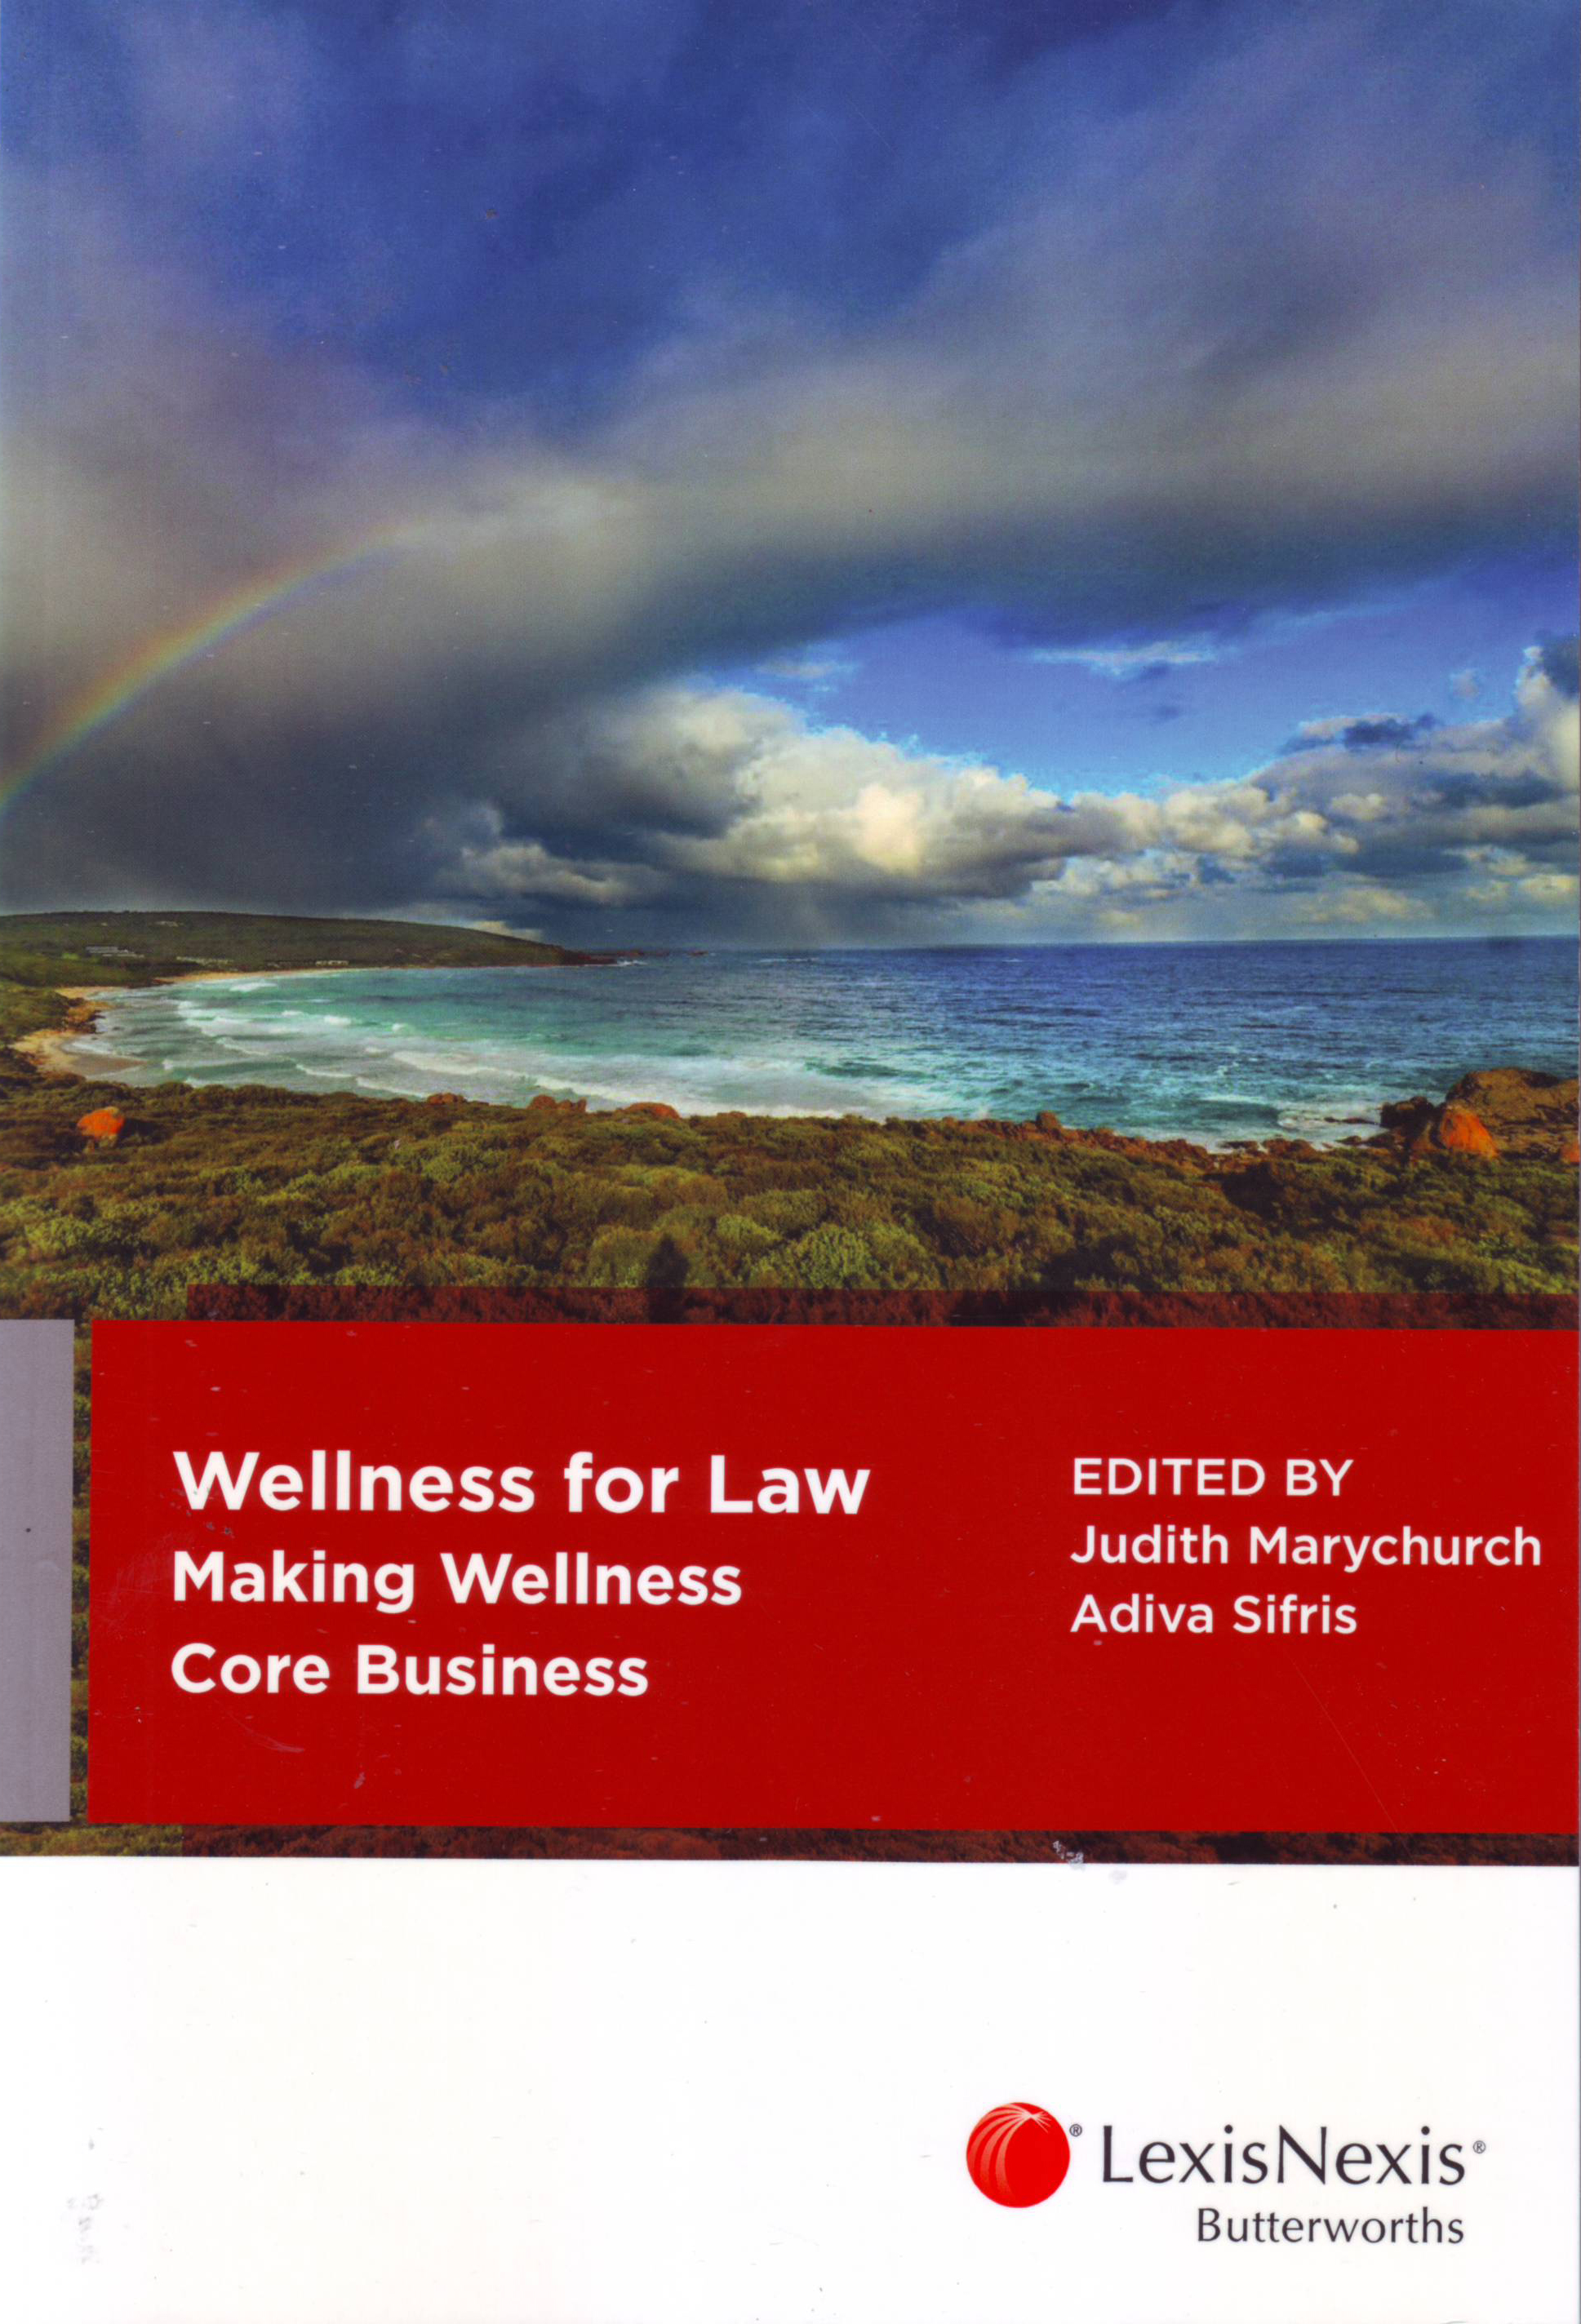 Wellness for Law: Making Wellness Core Business